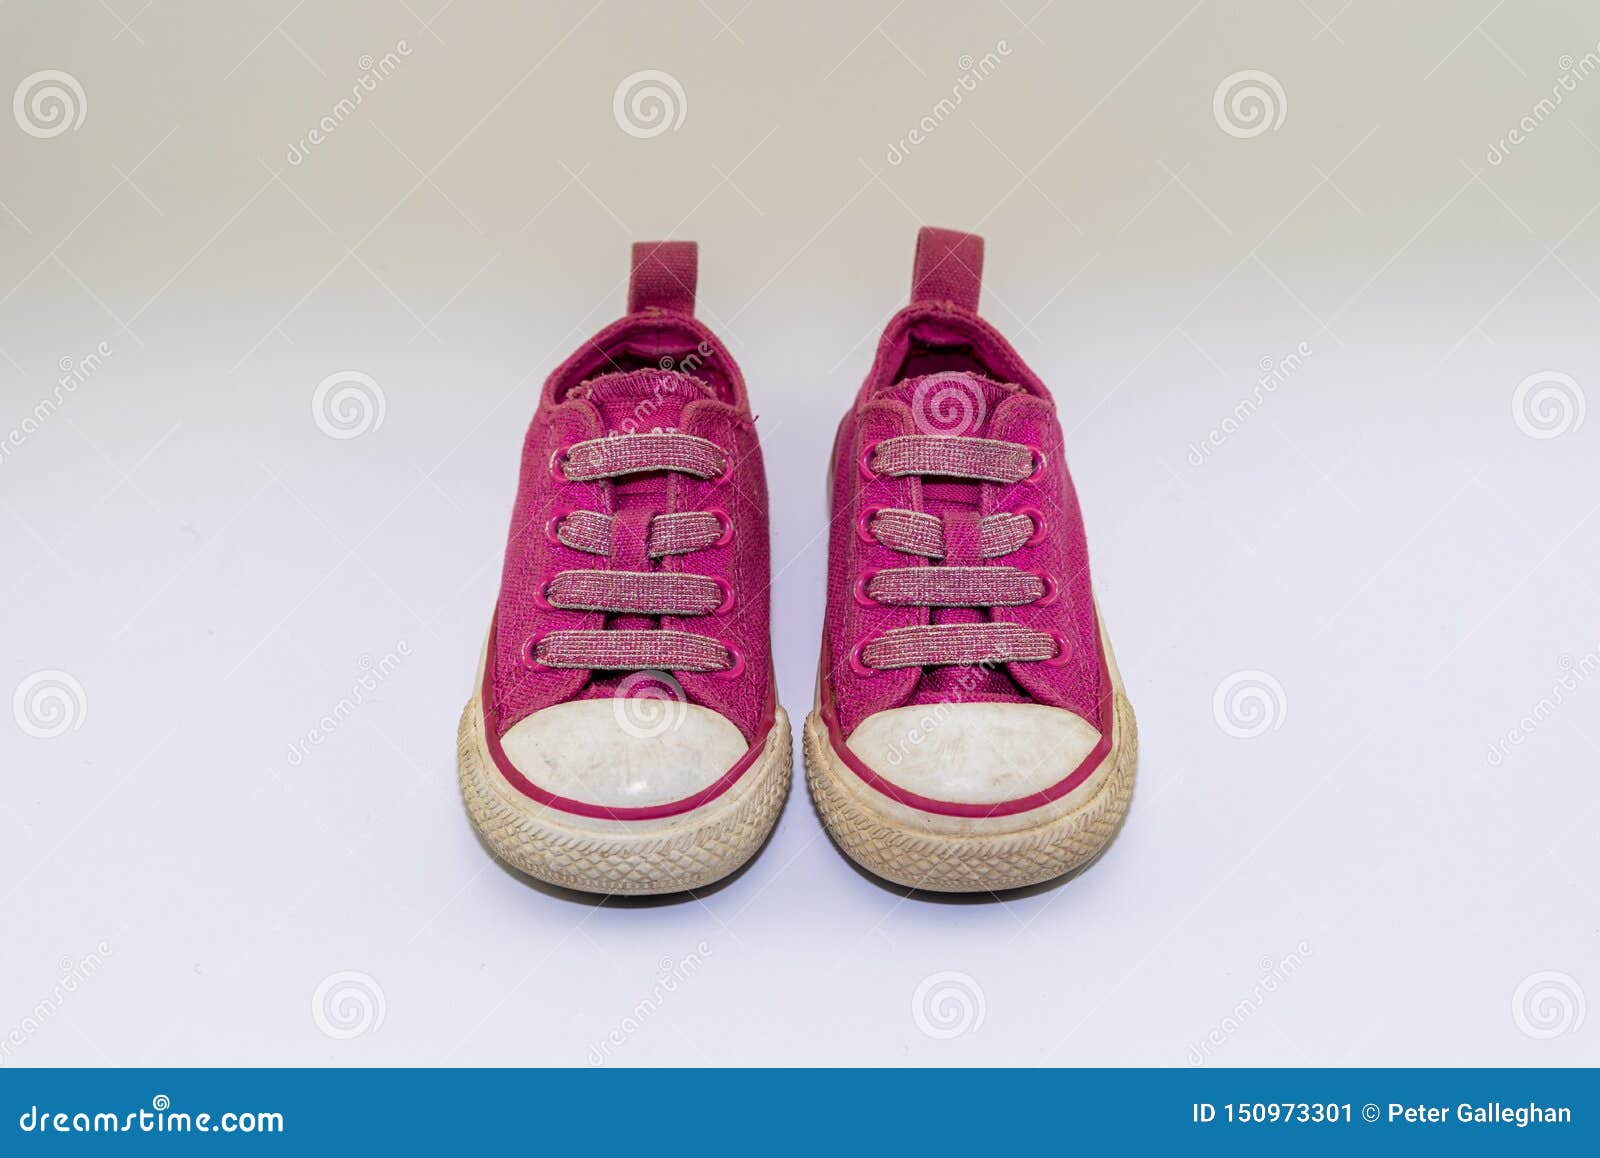 Cute Sparkly Pink Kids Shoes With Laces 